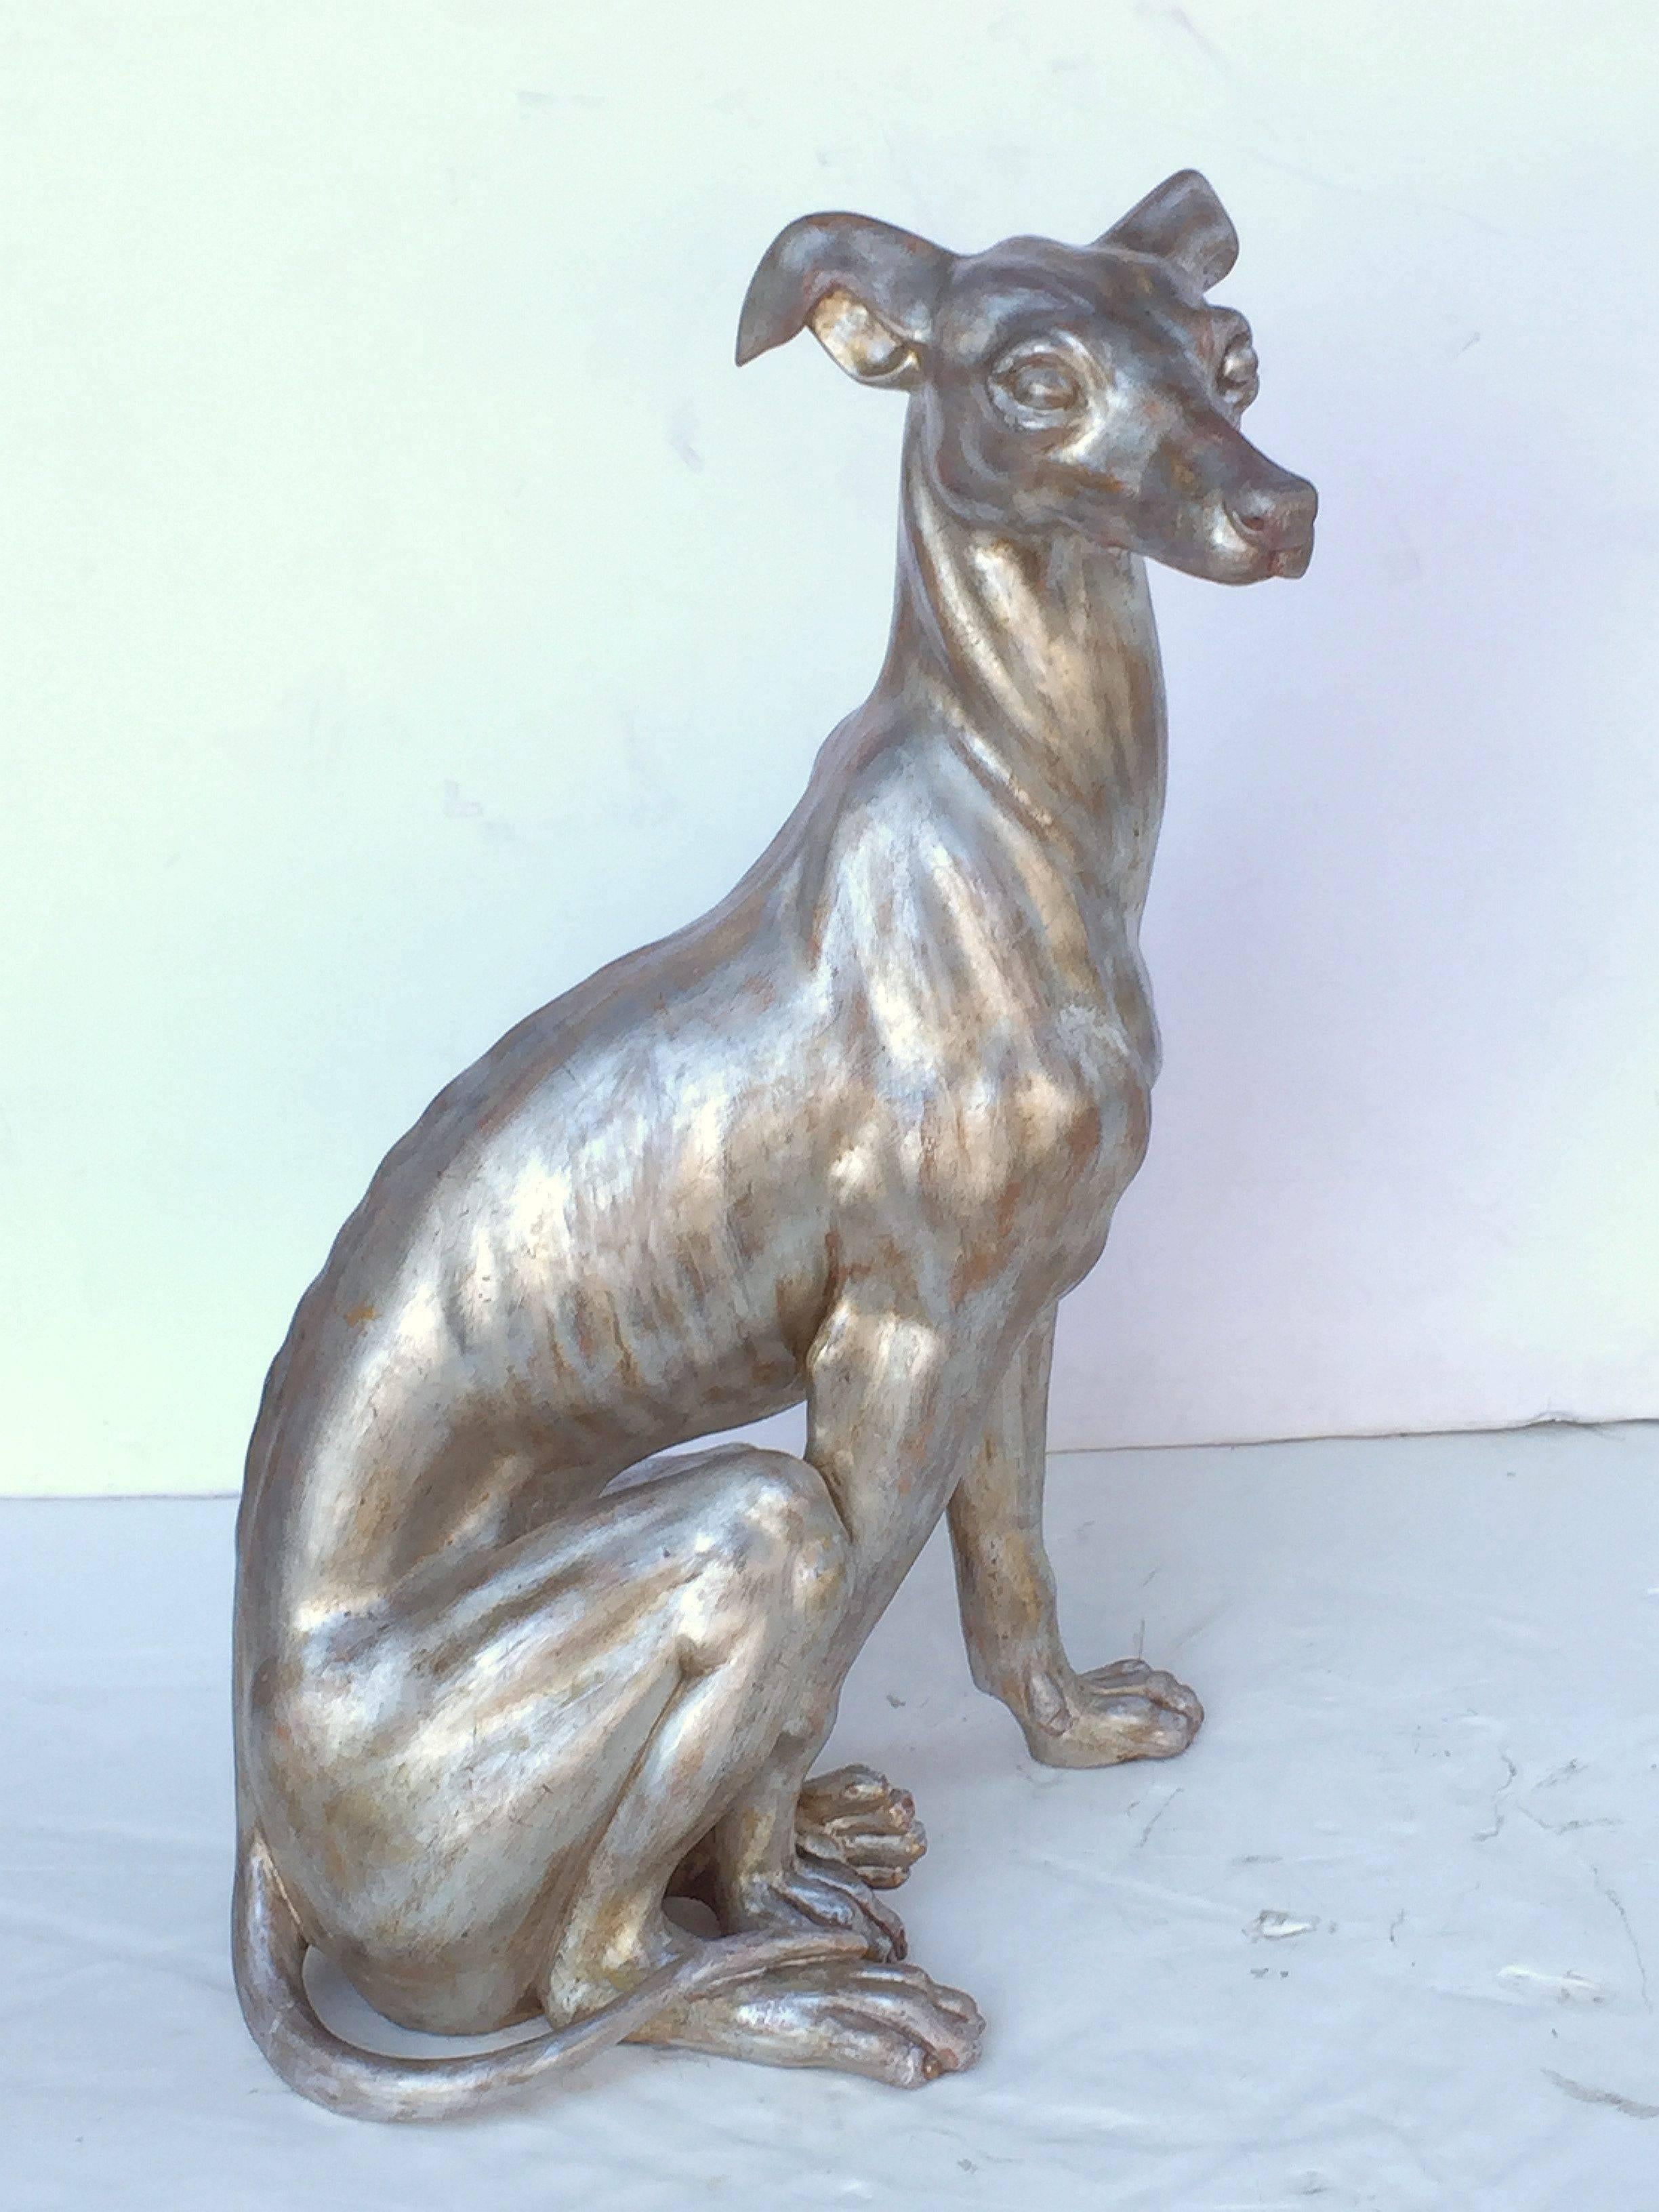 A handsome large Italian greyhound (or whippet) dog sculpture in a stylish seated pose, of carved wood with silver-leaf overlay.

Dimensions are

H  36 inches
W 23 inches
D 15 inches